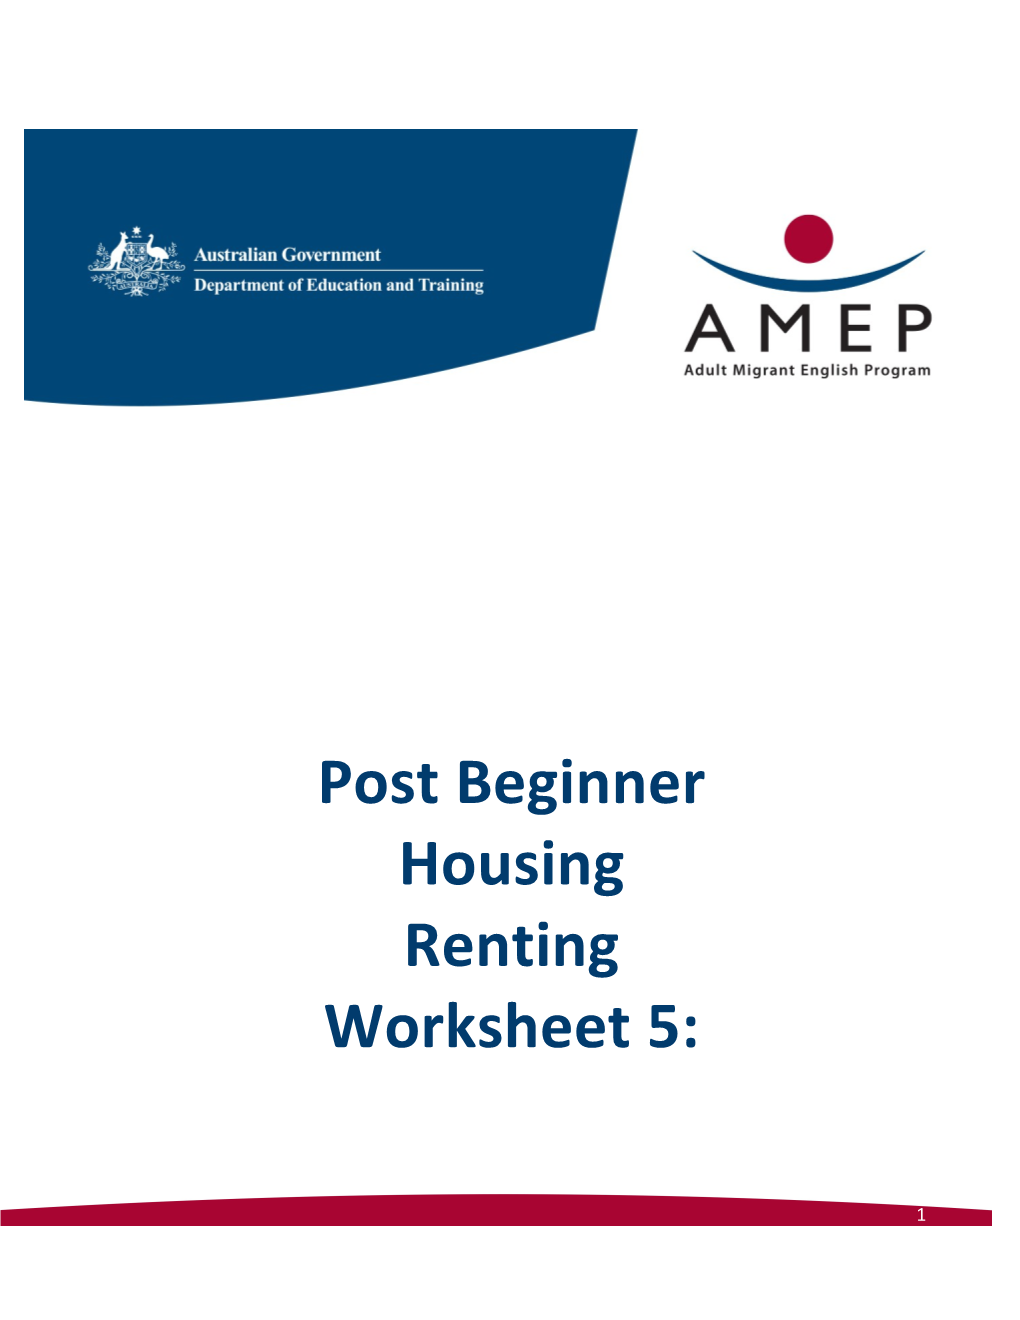 Post Beginner Housing Renting Worksheet 5: Ringing About a Place to Rent (2)